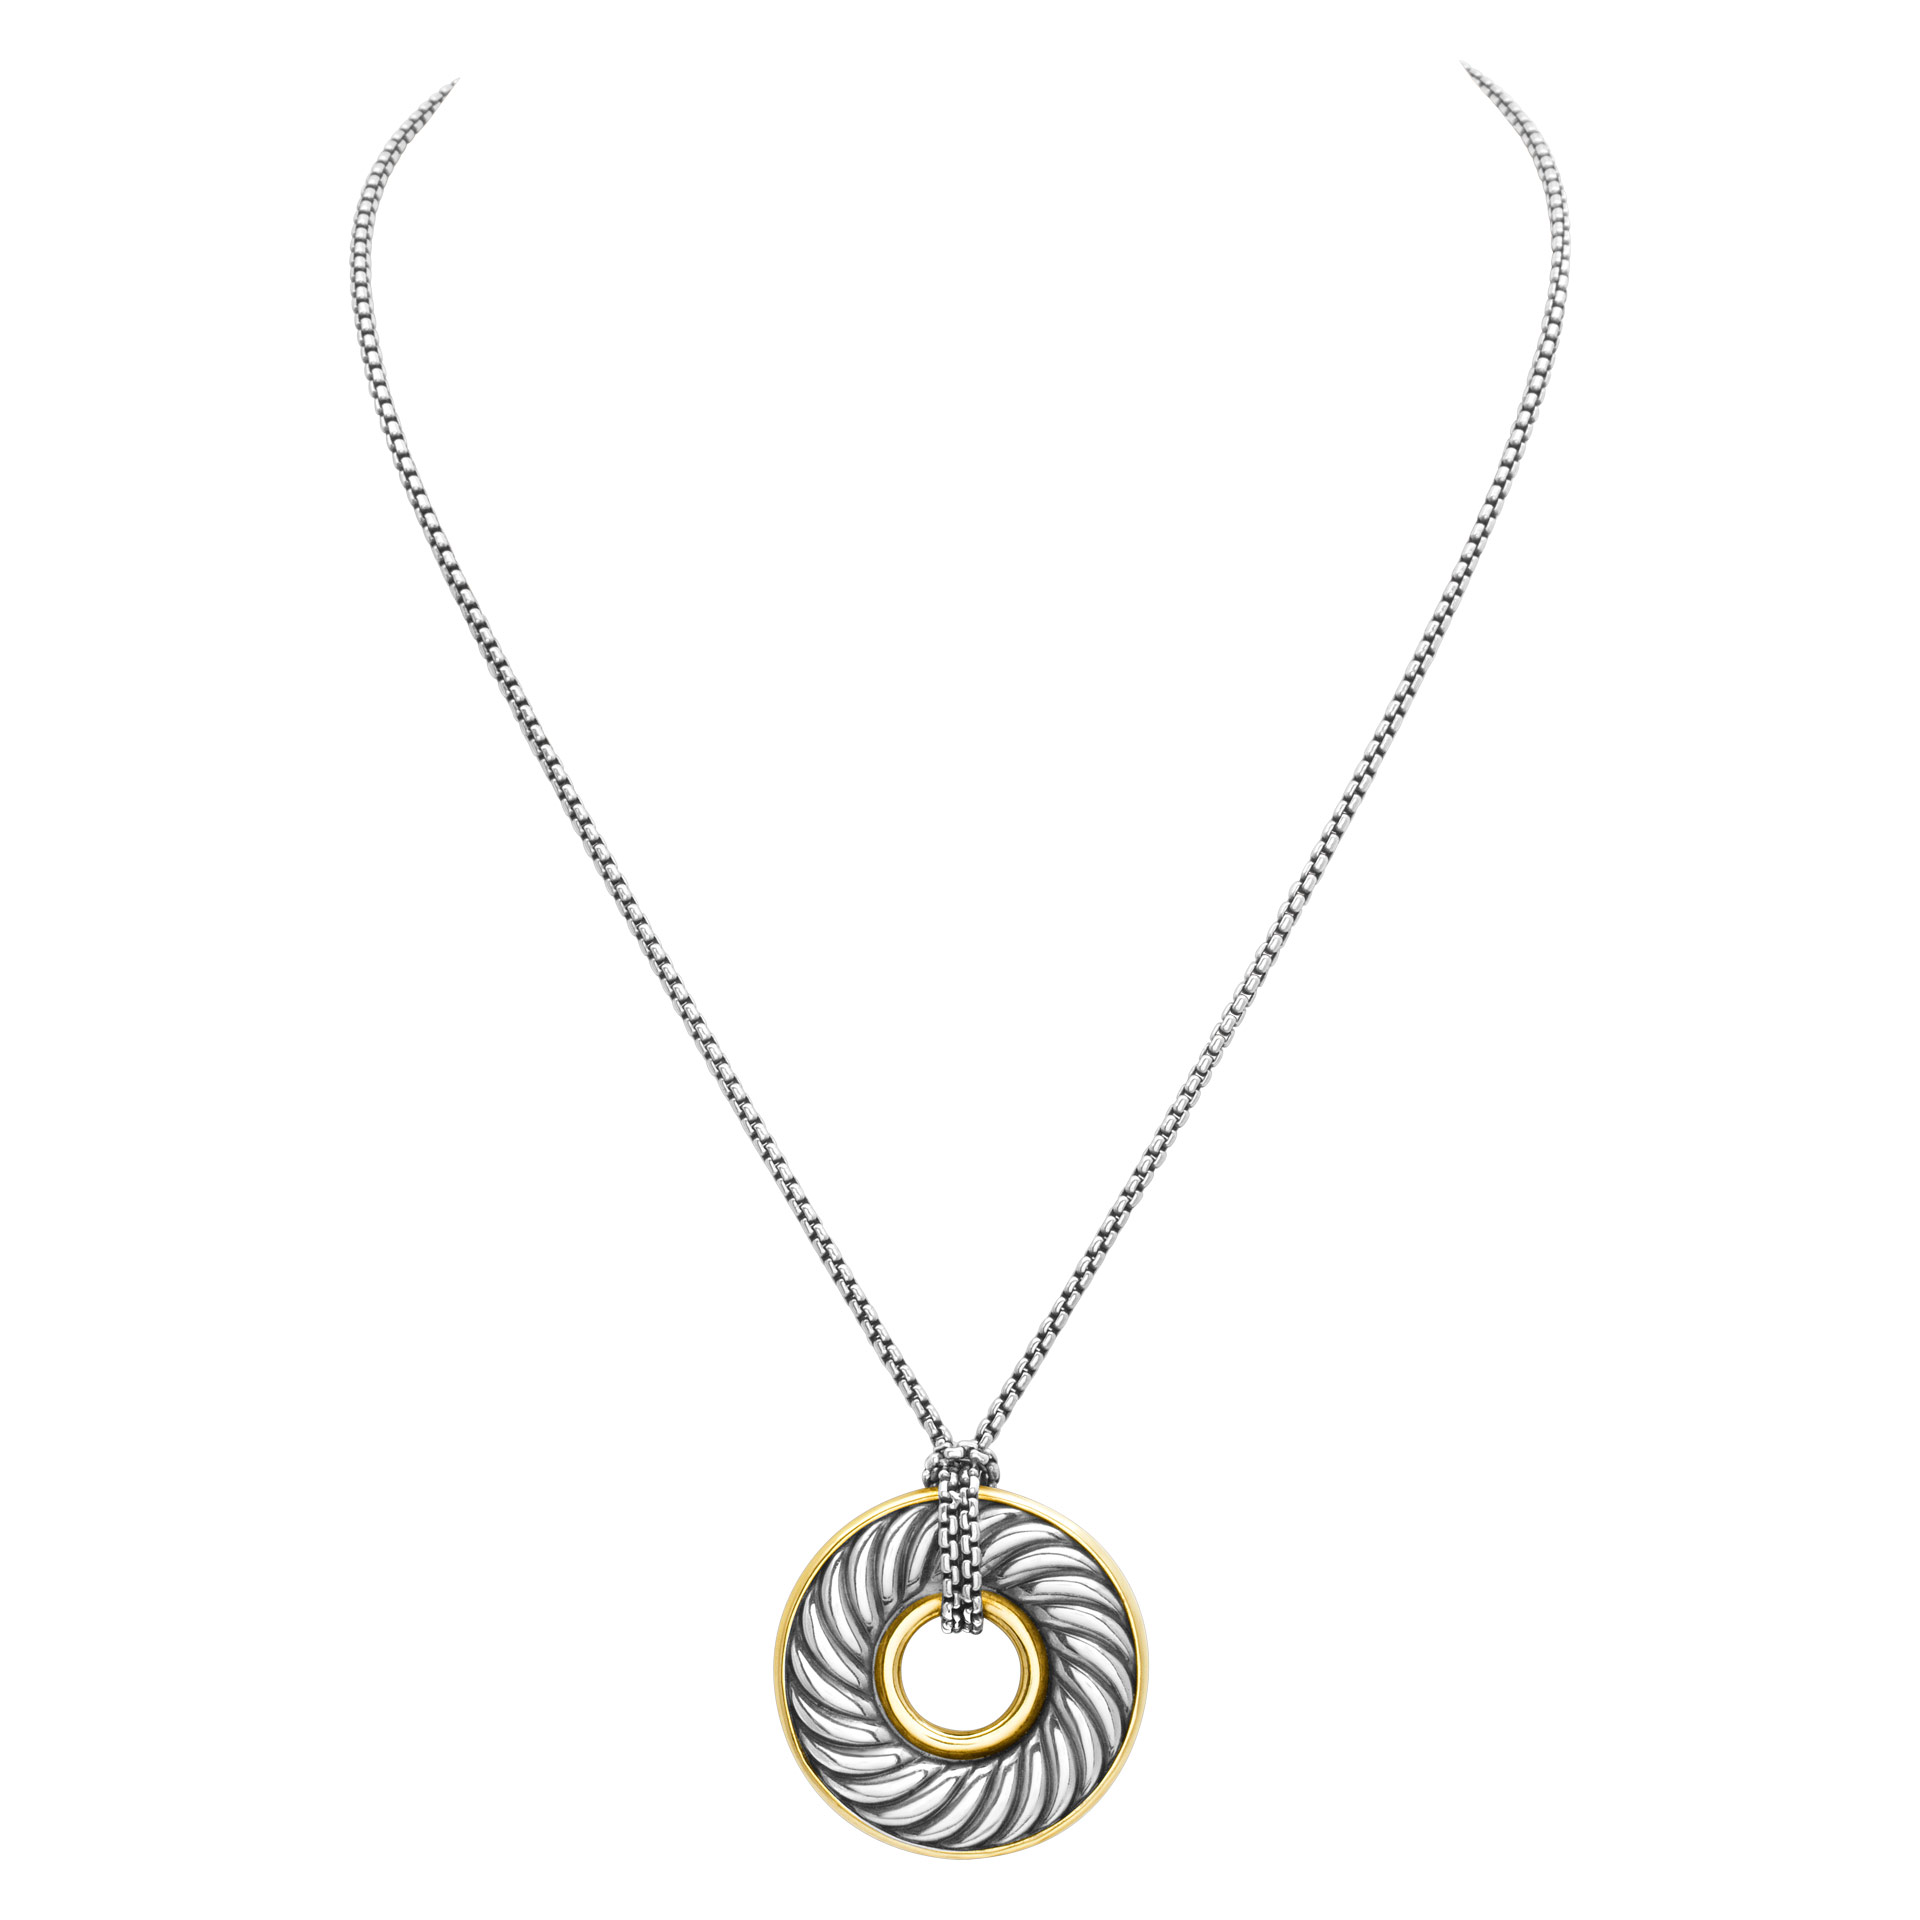 David Yurman carved cable circle pendant necklace in 18k & sterling silver image 1